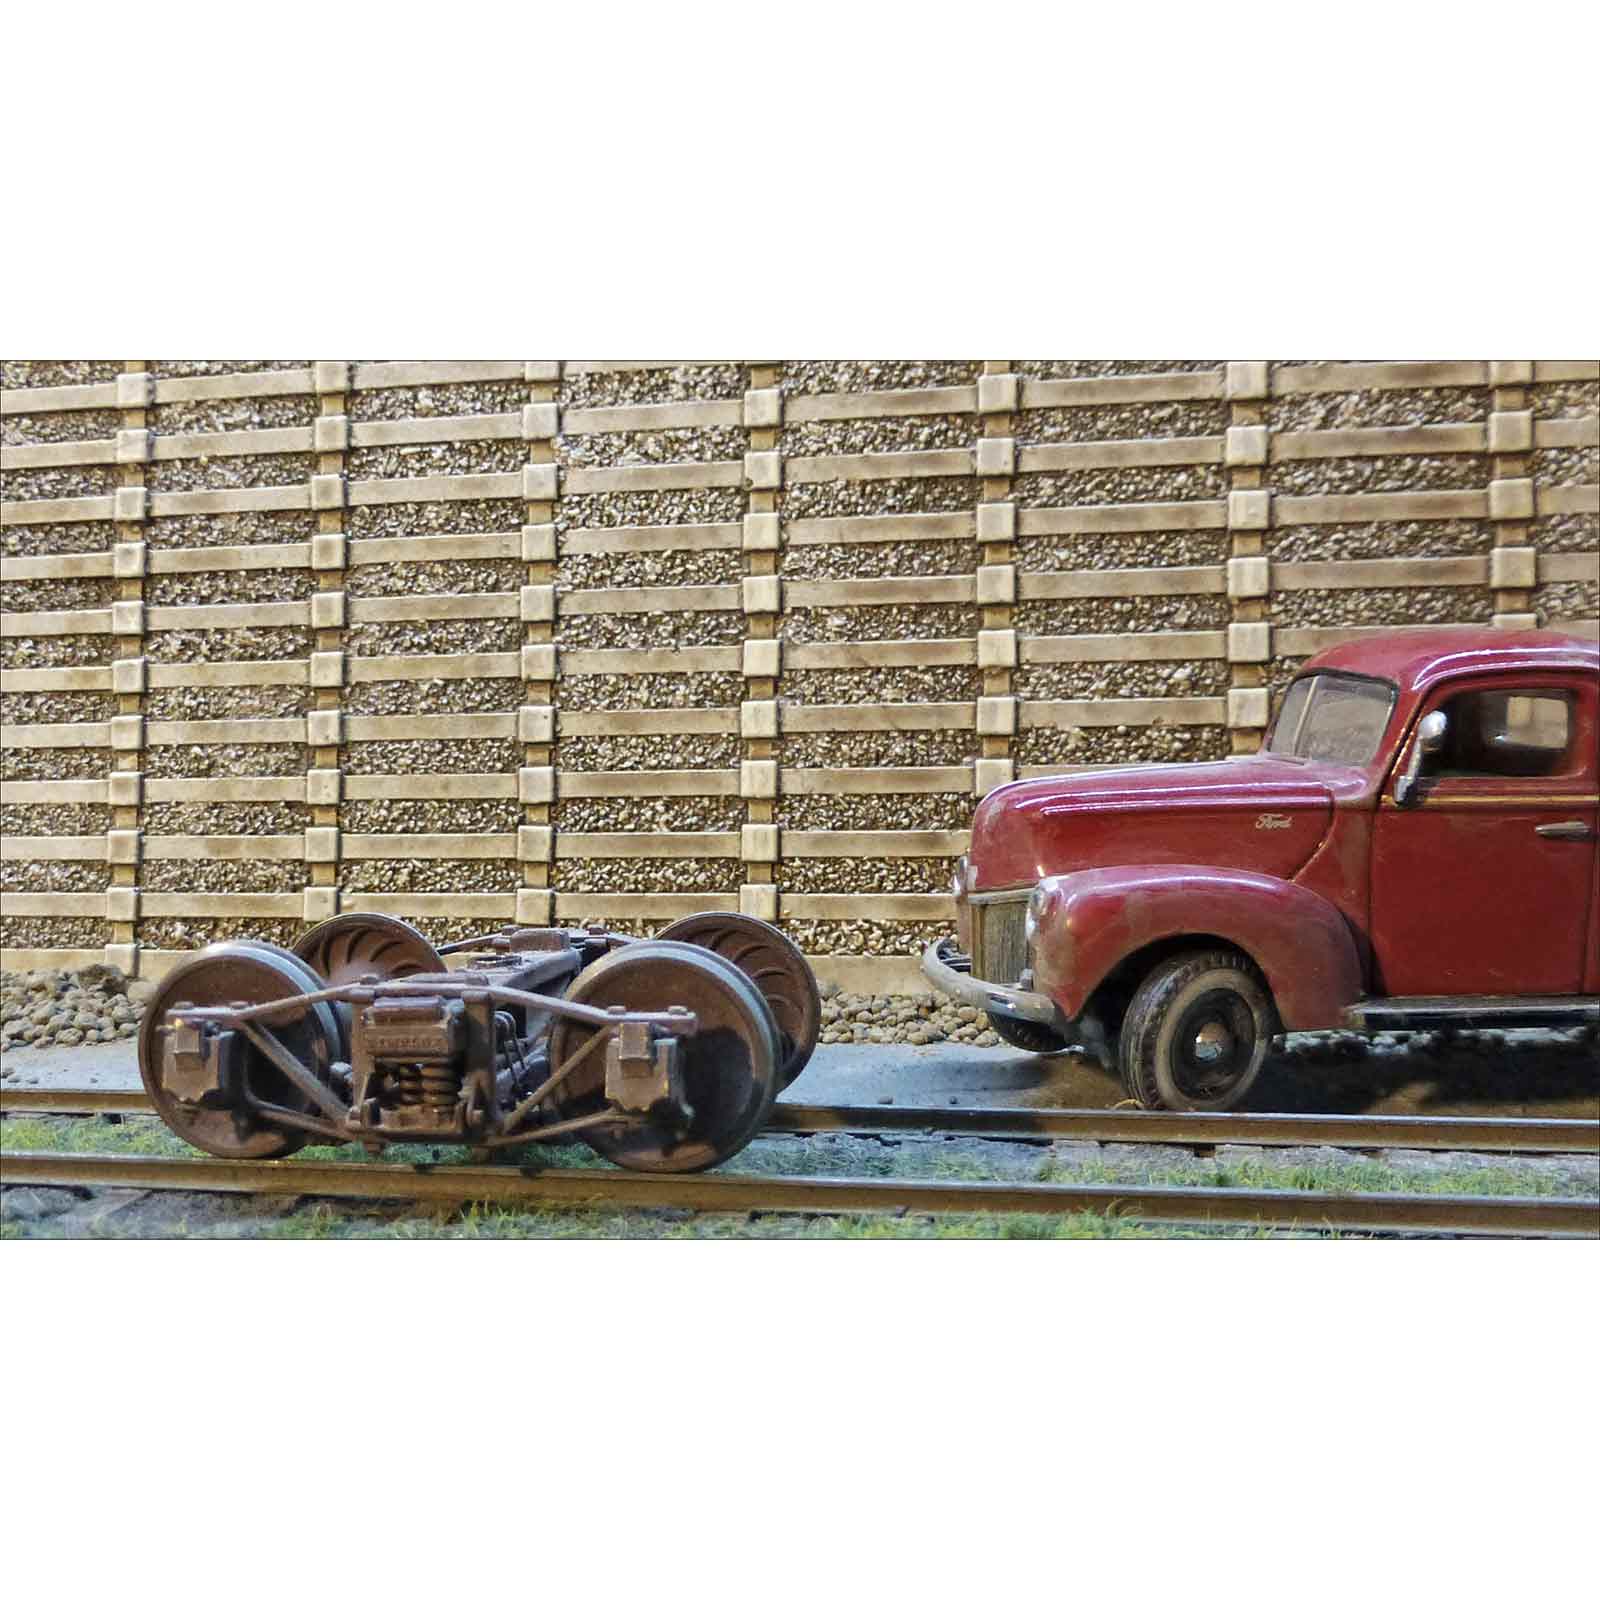 Chooch Flexible Concrete Cribbing Wall, Small with Peel & Stick Backing - HO & N Scale - Micro - Mark Scenery